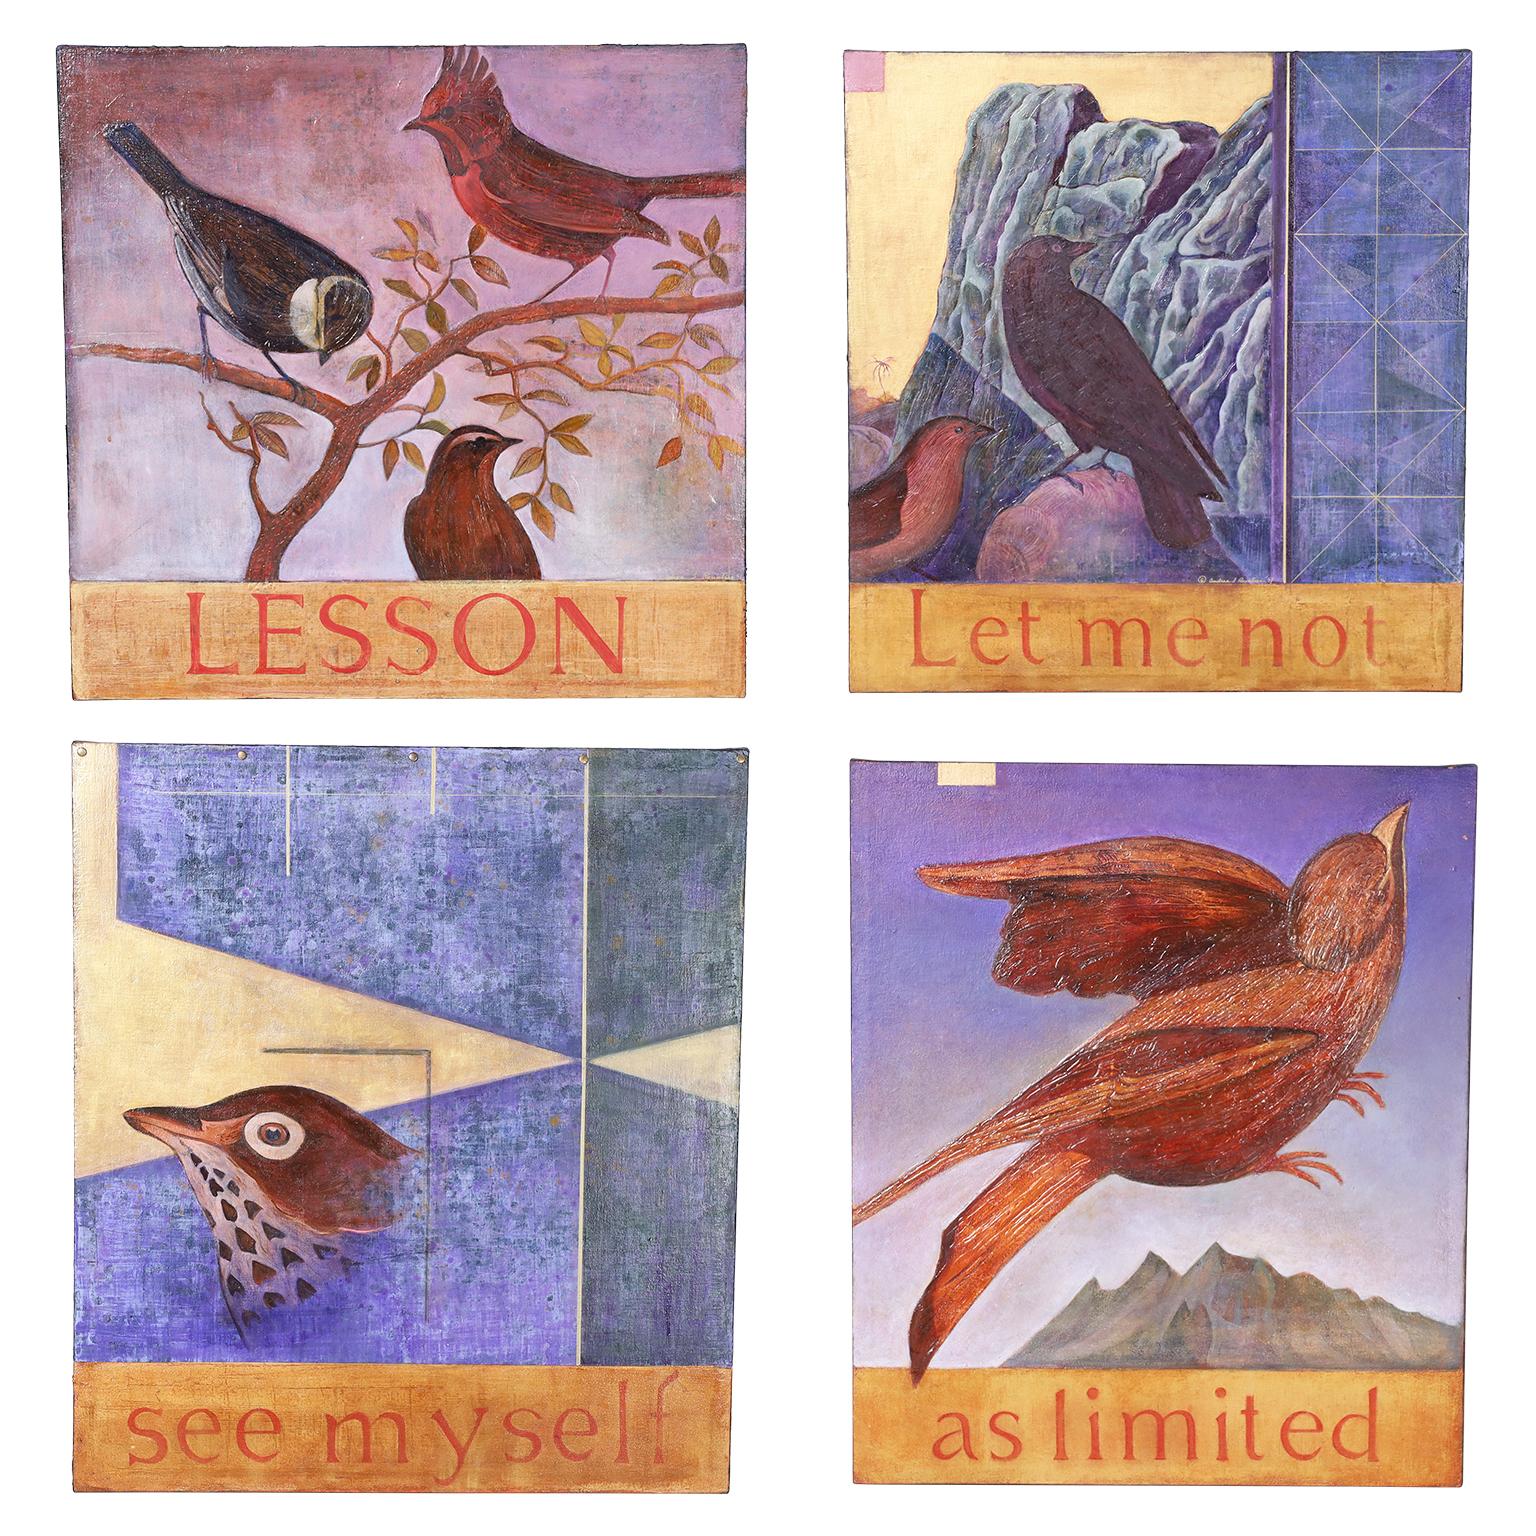 Lofty set of four modernist gouache and acrylic paintings on canvas of birds in a variety of situations as messengers of personal opportunities. Signed by noted Savannah artist Andrea Rountree.

"Lesson" measures H: 26 W: 27 D: 2.5

"Let me not"